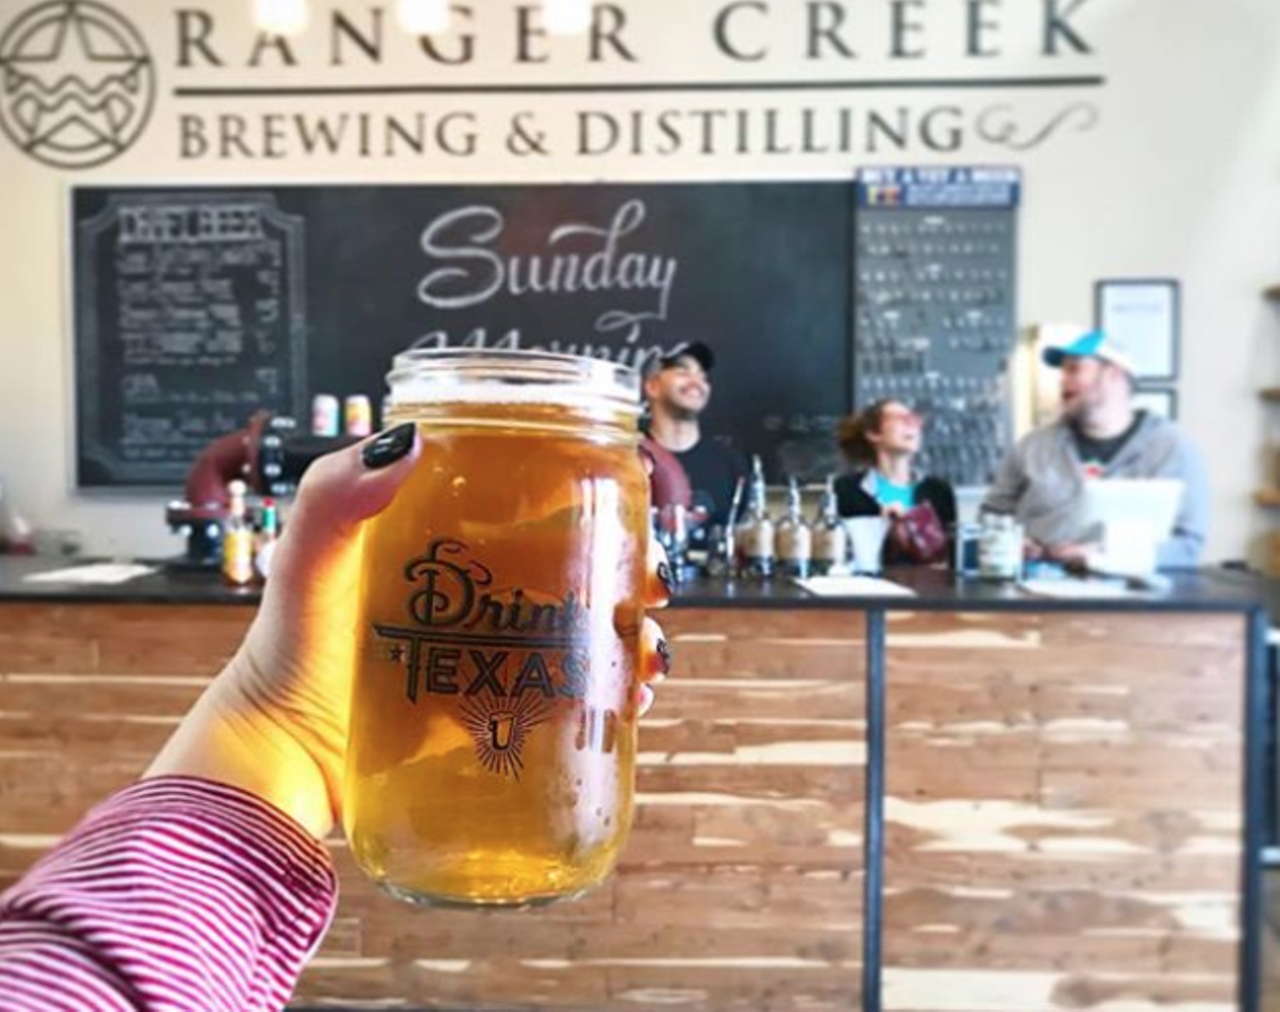 Whiskey and a growing lineup of beers can be found here. Try them for happy hour or find their first canned offering, San Antonio Lager, across town in select stores.
Photo via Instagram / stephosnacks